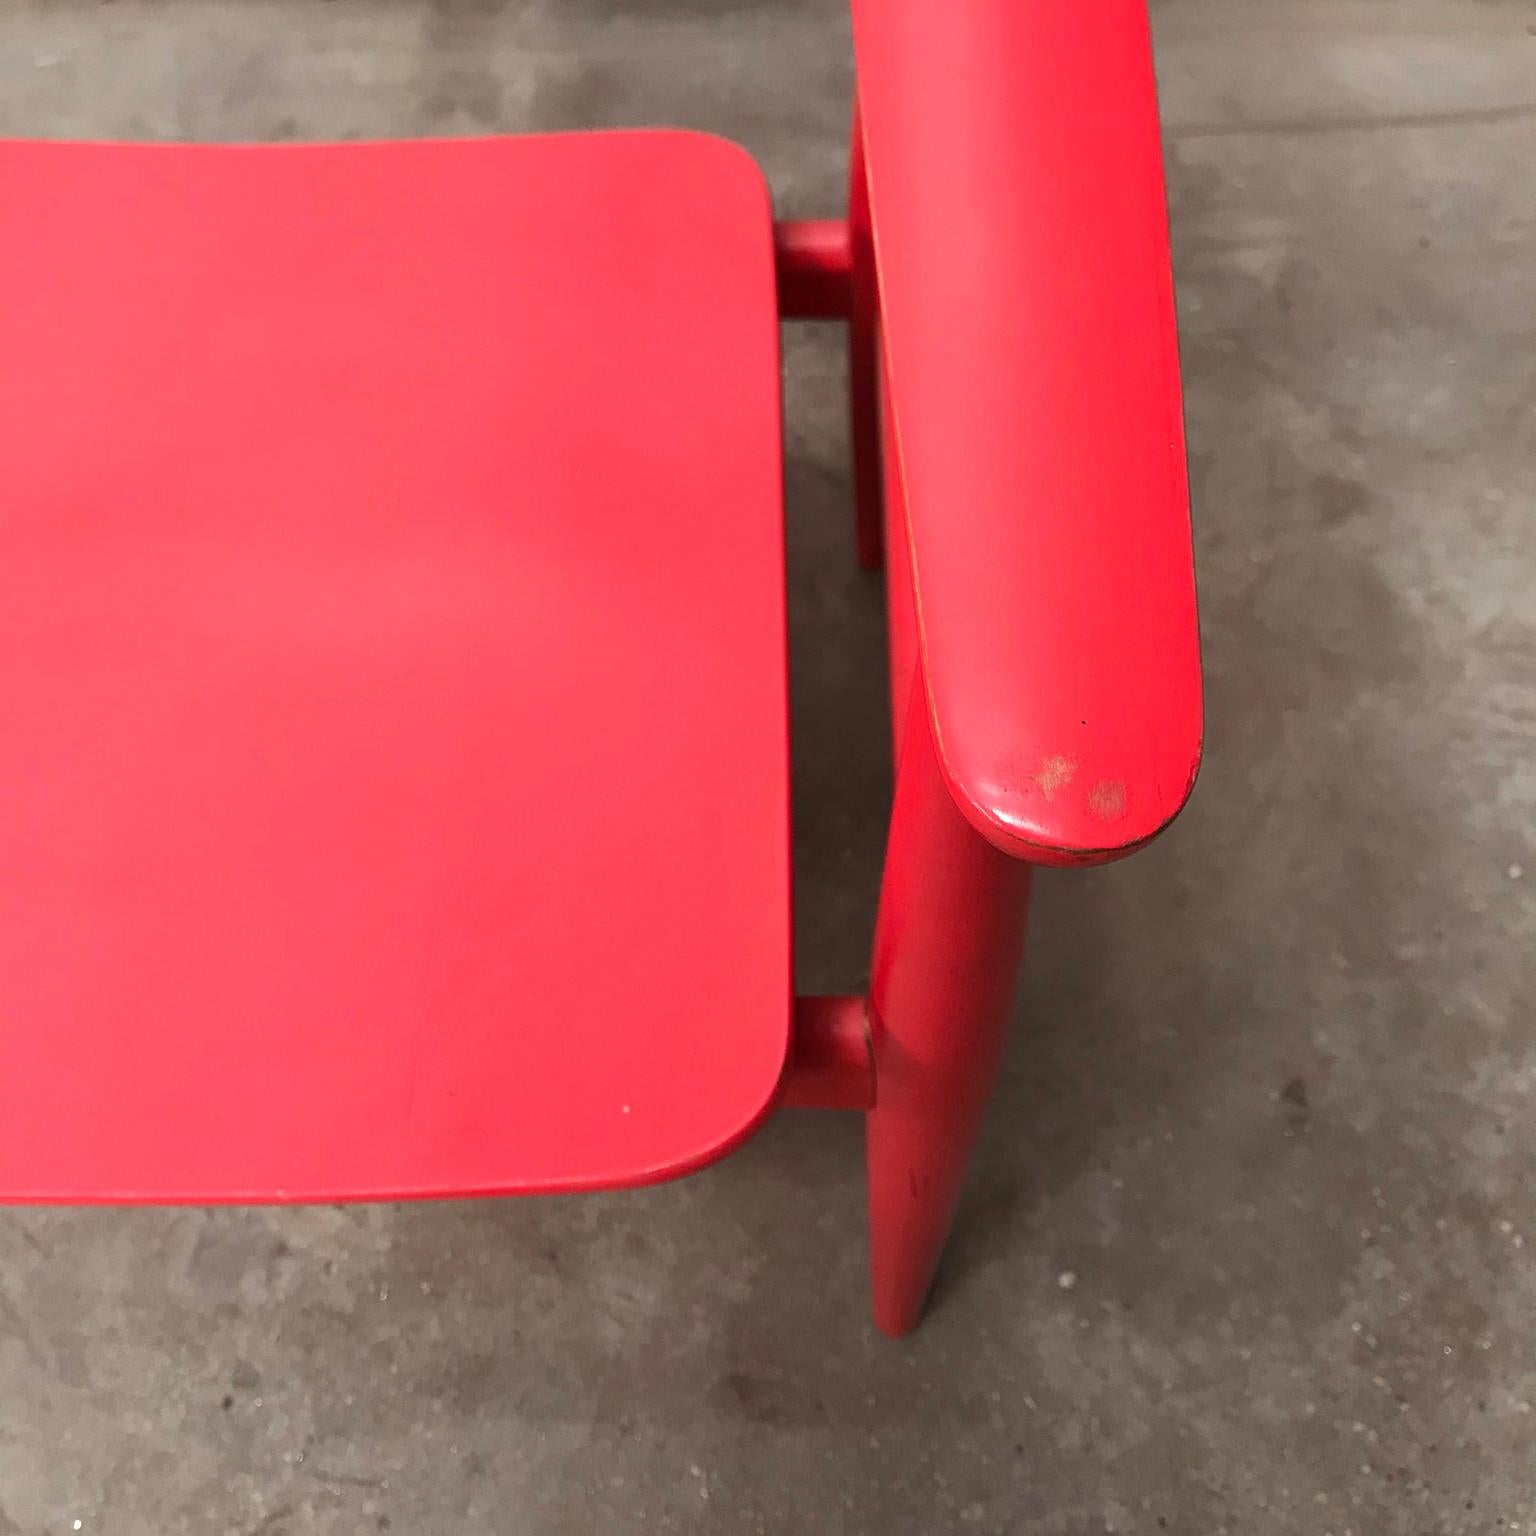 Very Rare Wegner Side Chair in Originally Red Painted Wood, circa 1930 For Sale 7